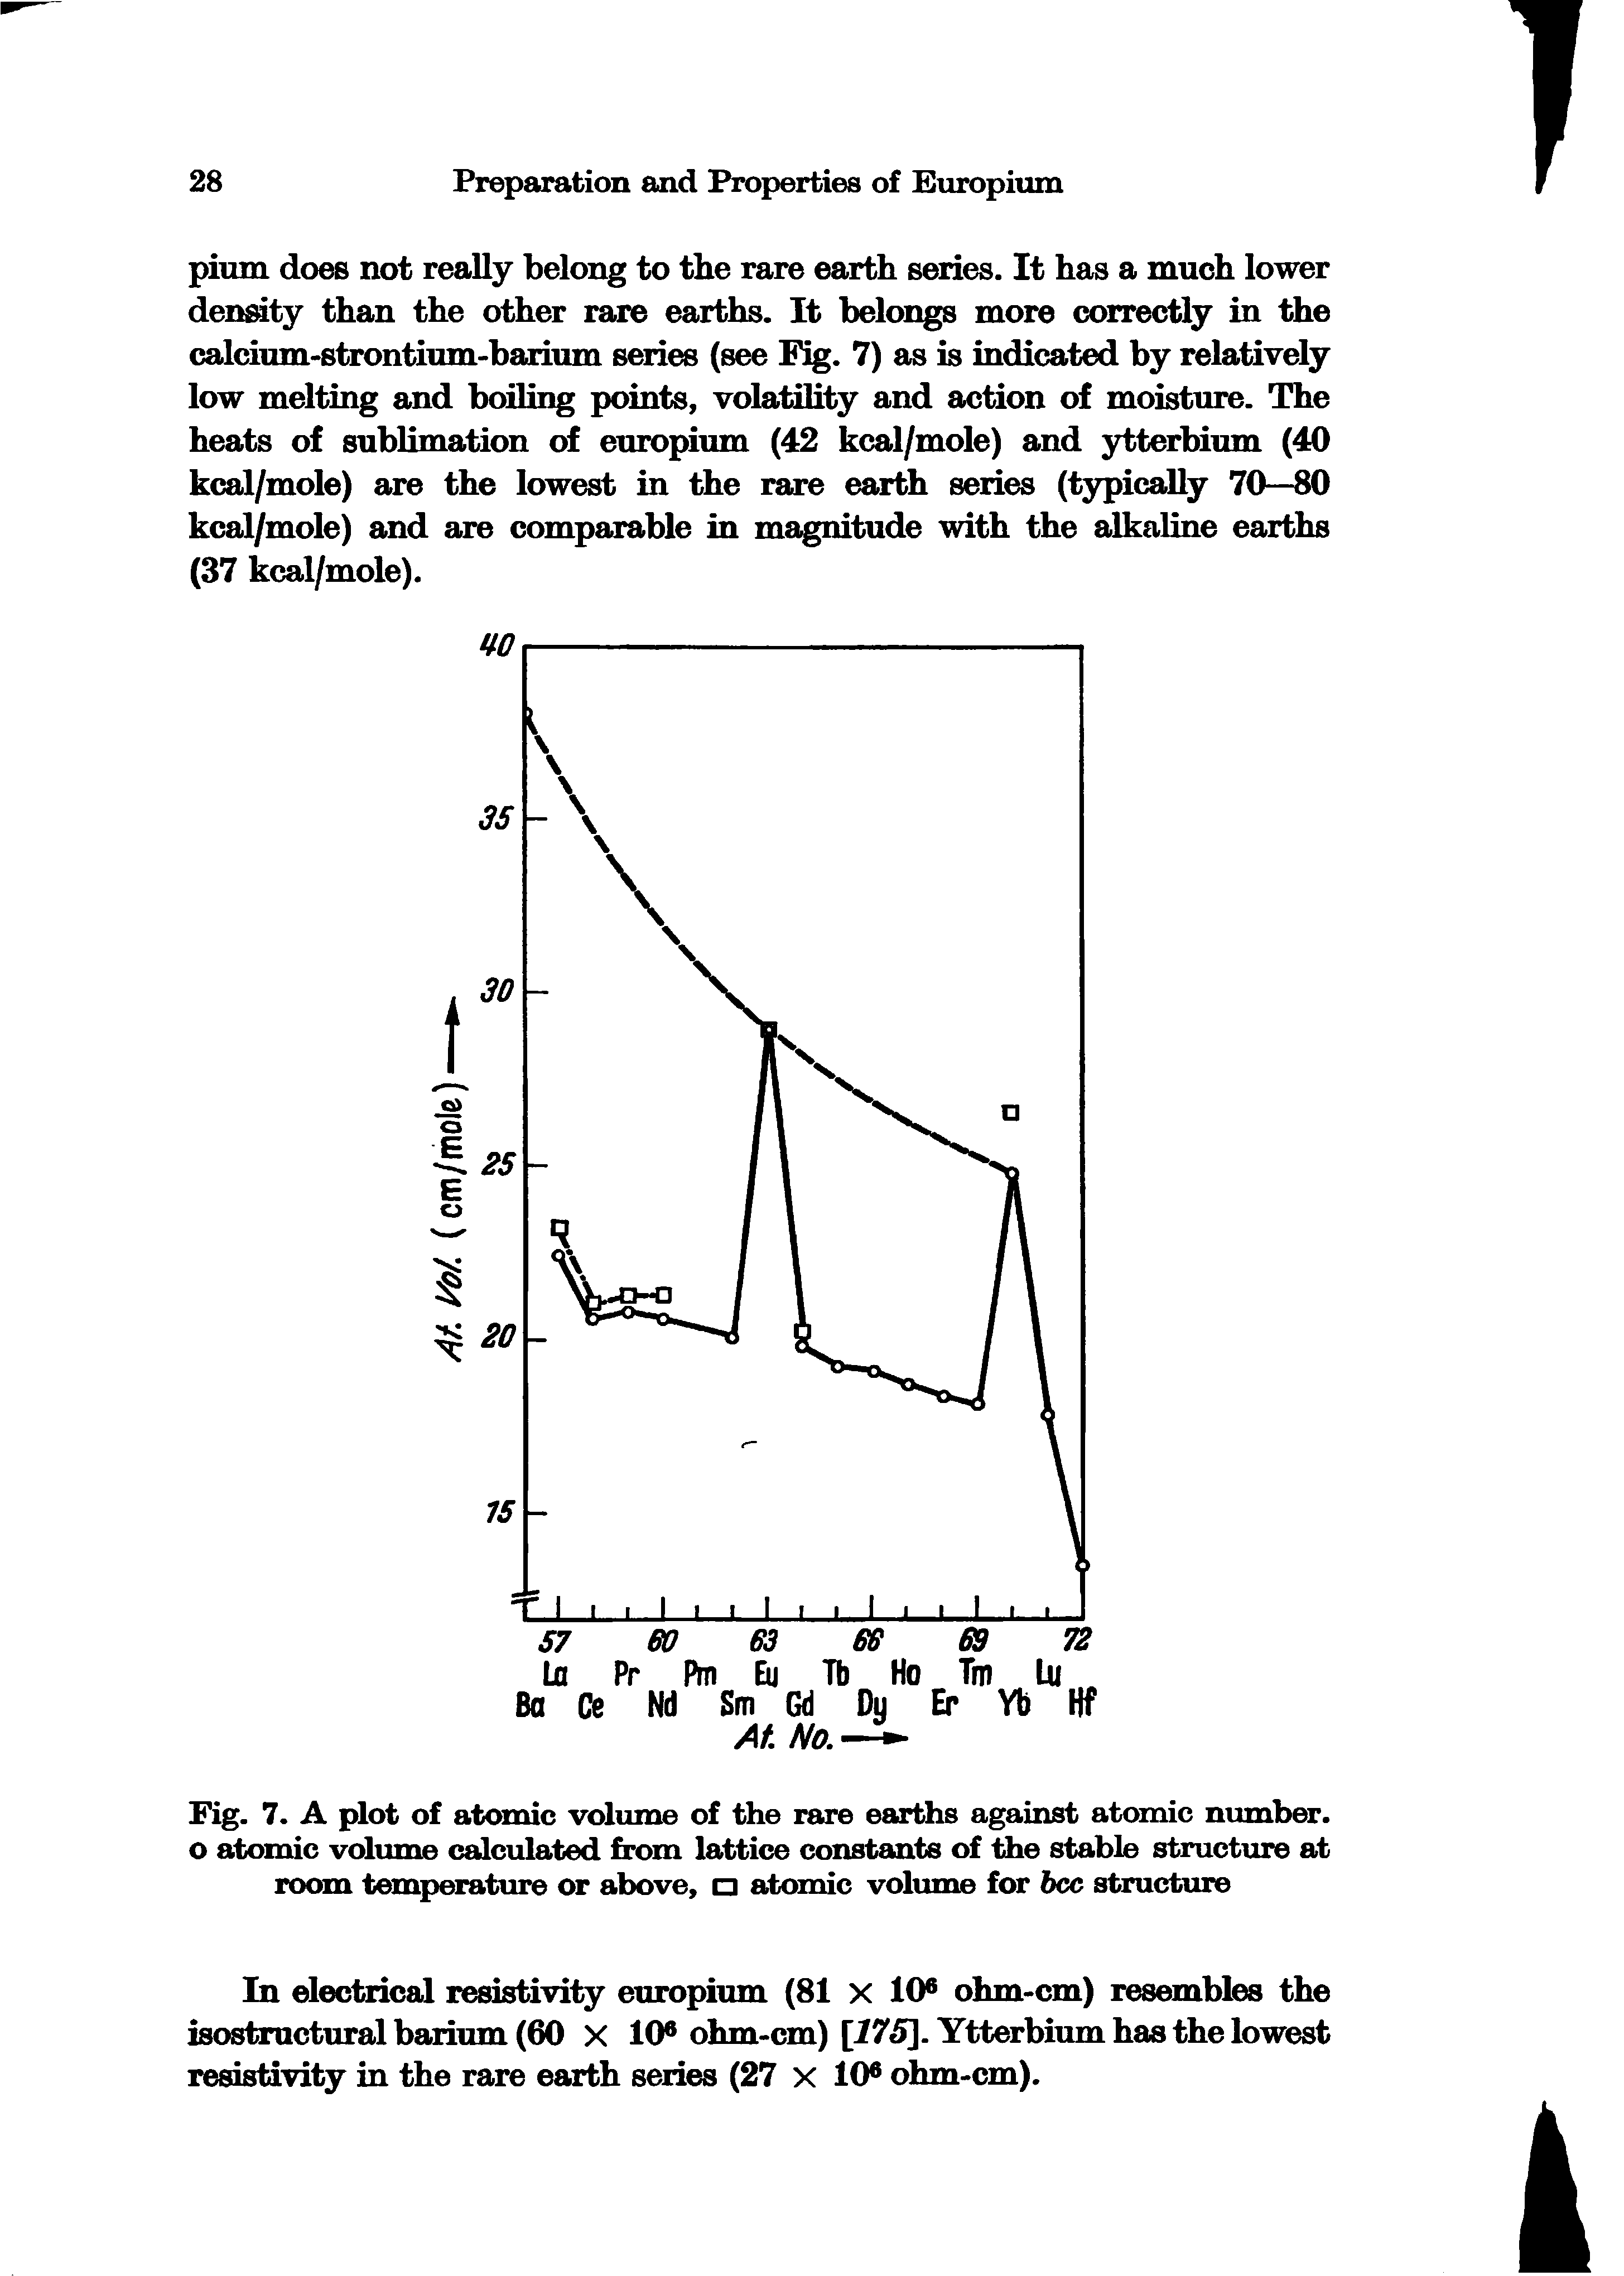 Fig. 7. A plot of atomic volume of the rare earths against atomic number, o atomic volume calculated from lattice constants of the stable structure at room temperature or above, atomic volume for bcc structure...